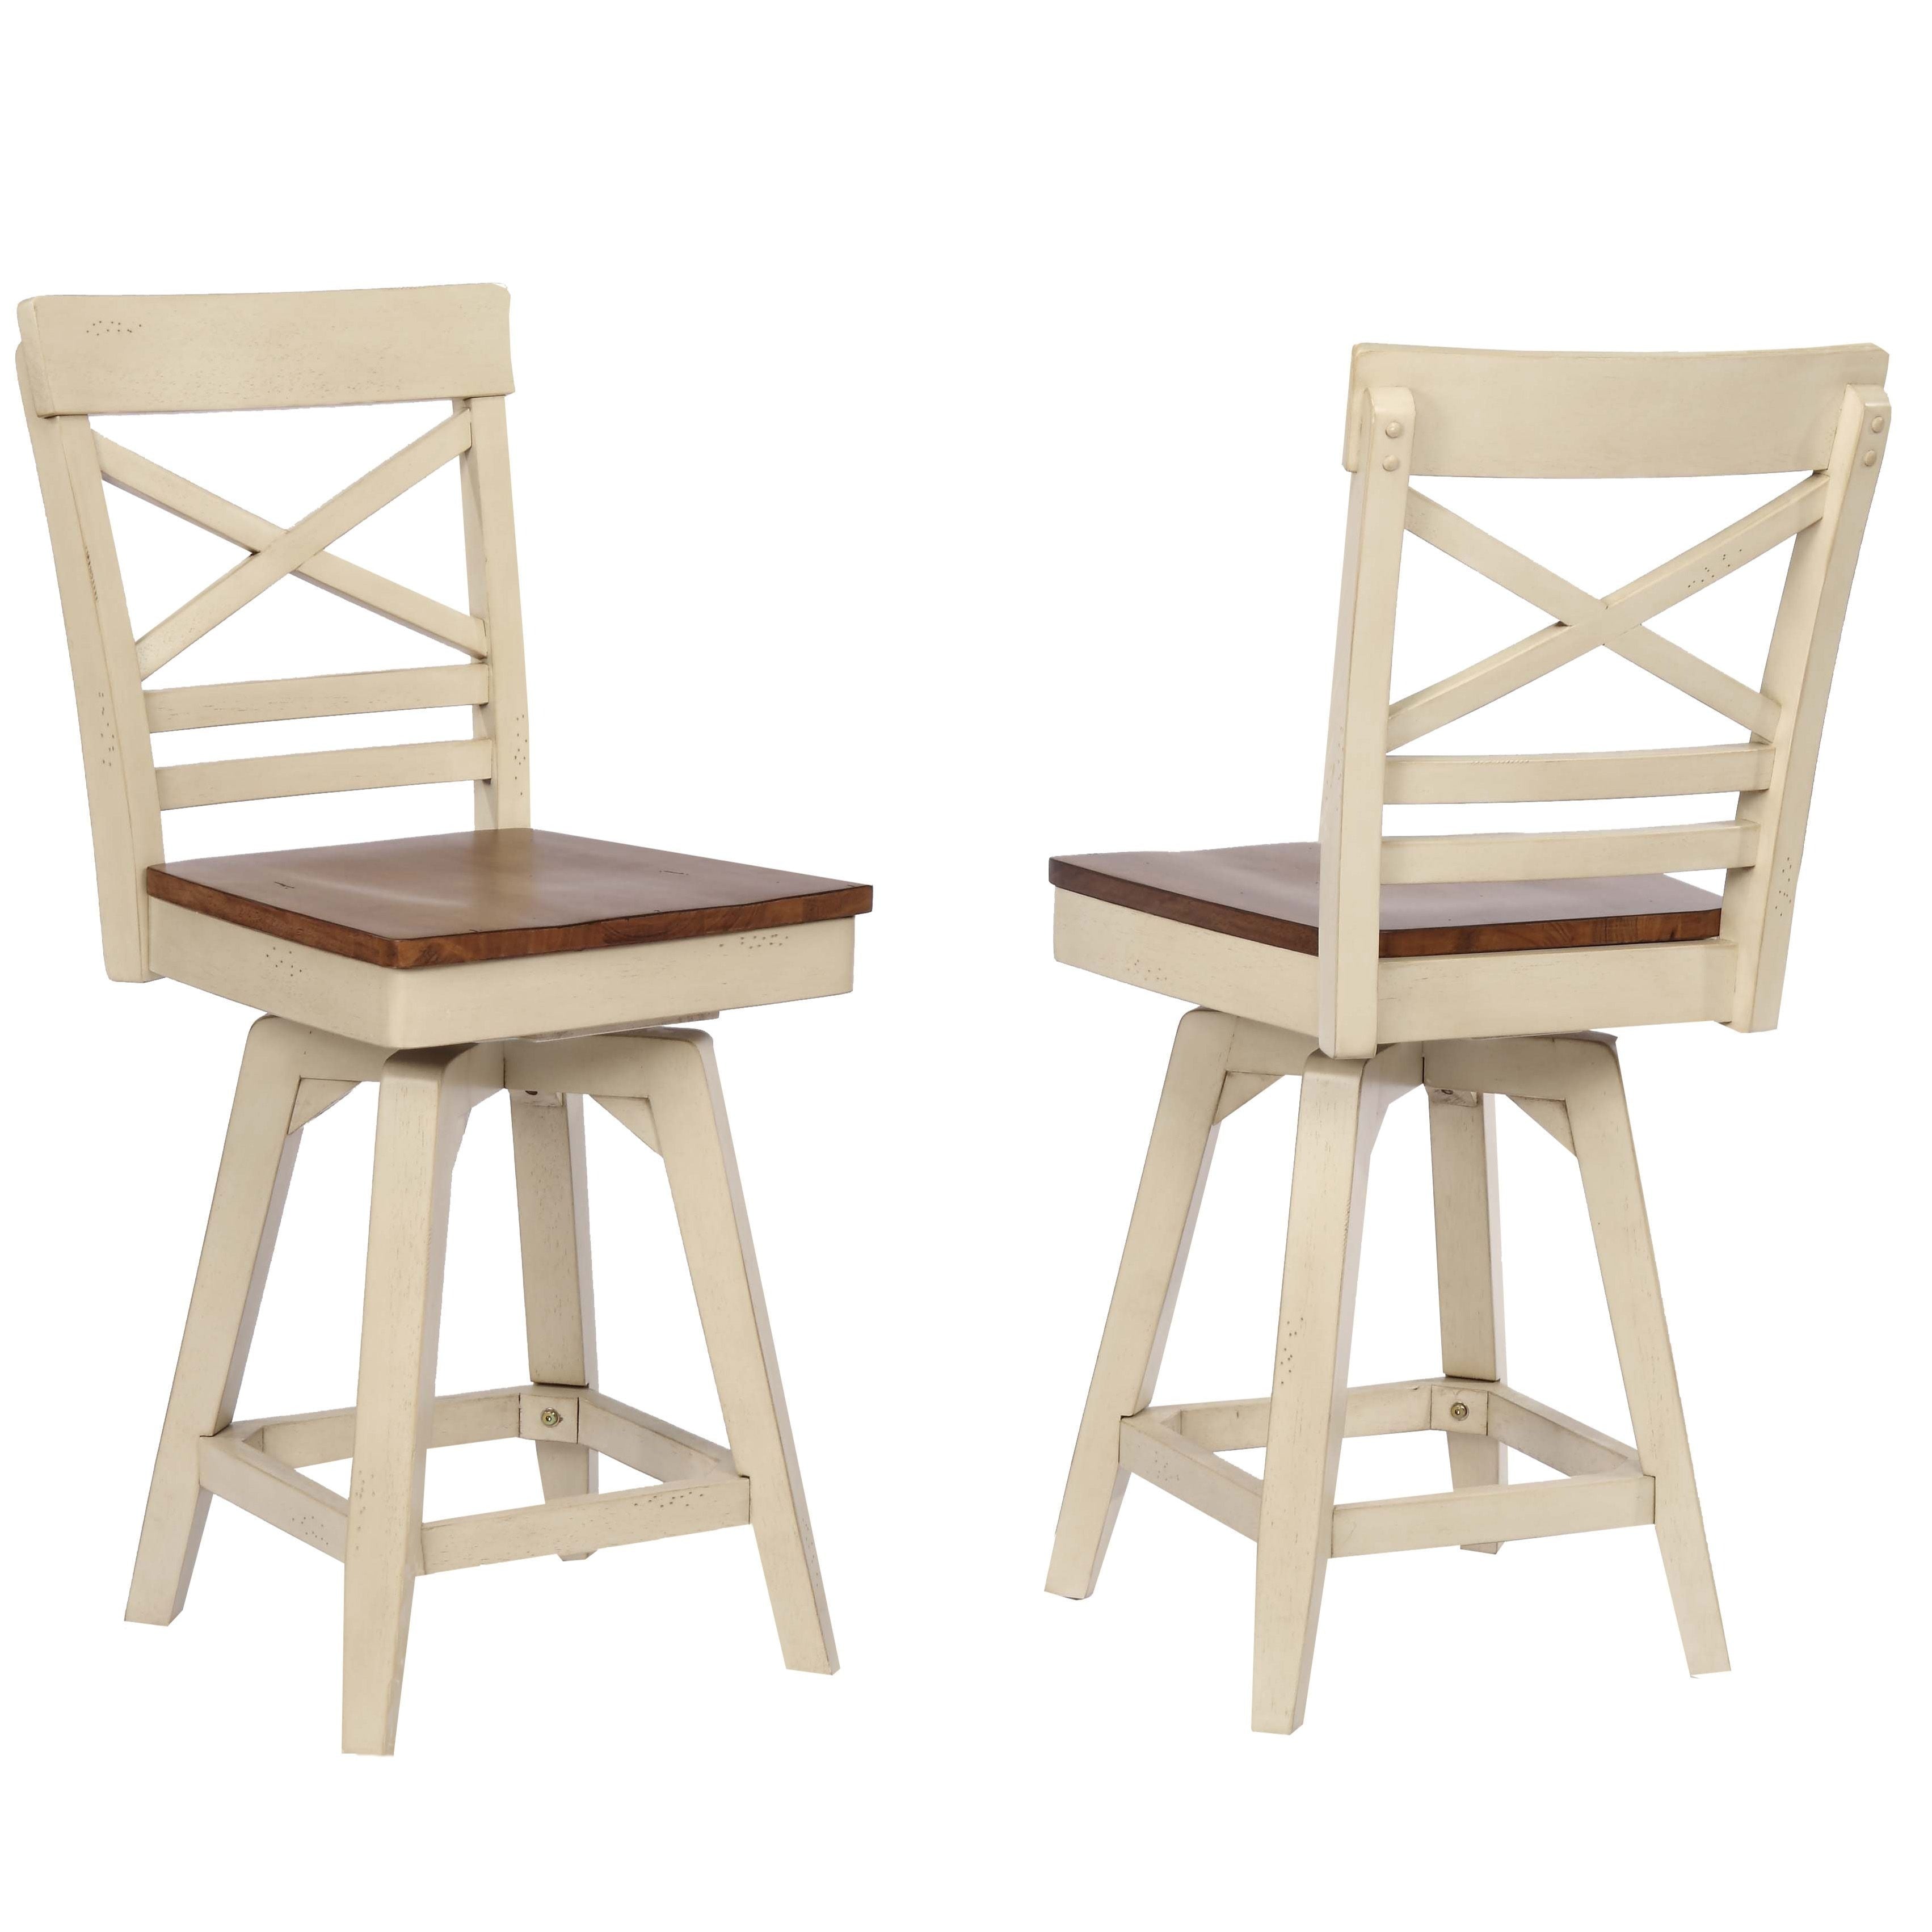 ECI Furniture Choices X Back Bartstool Height with Acacia Finished Seat(2pcs)